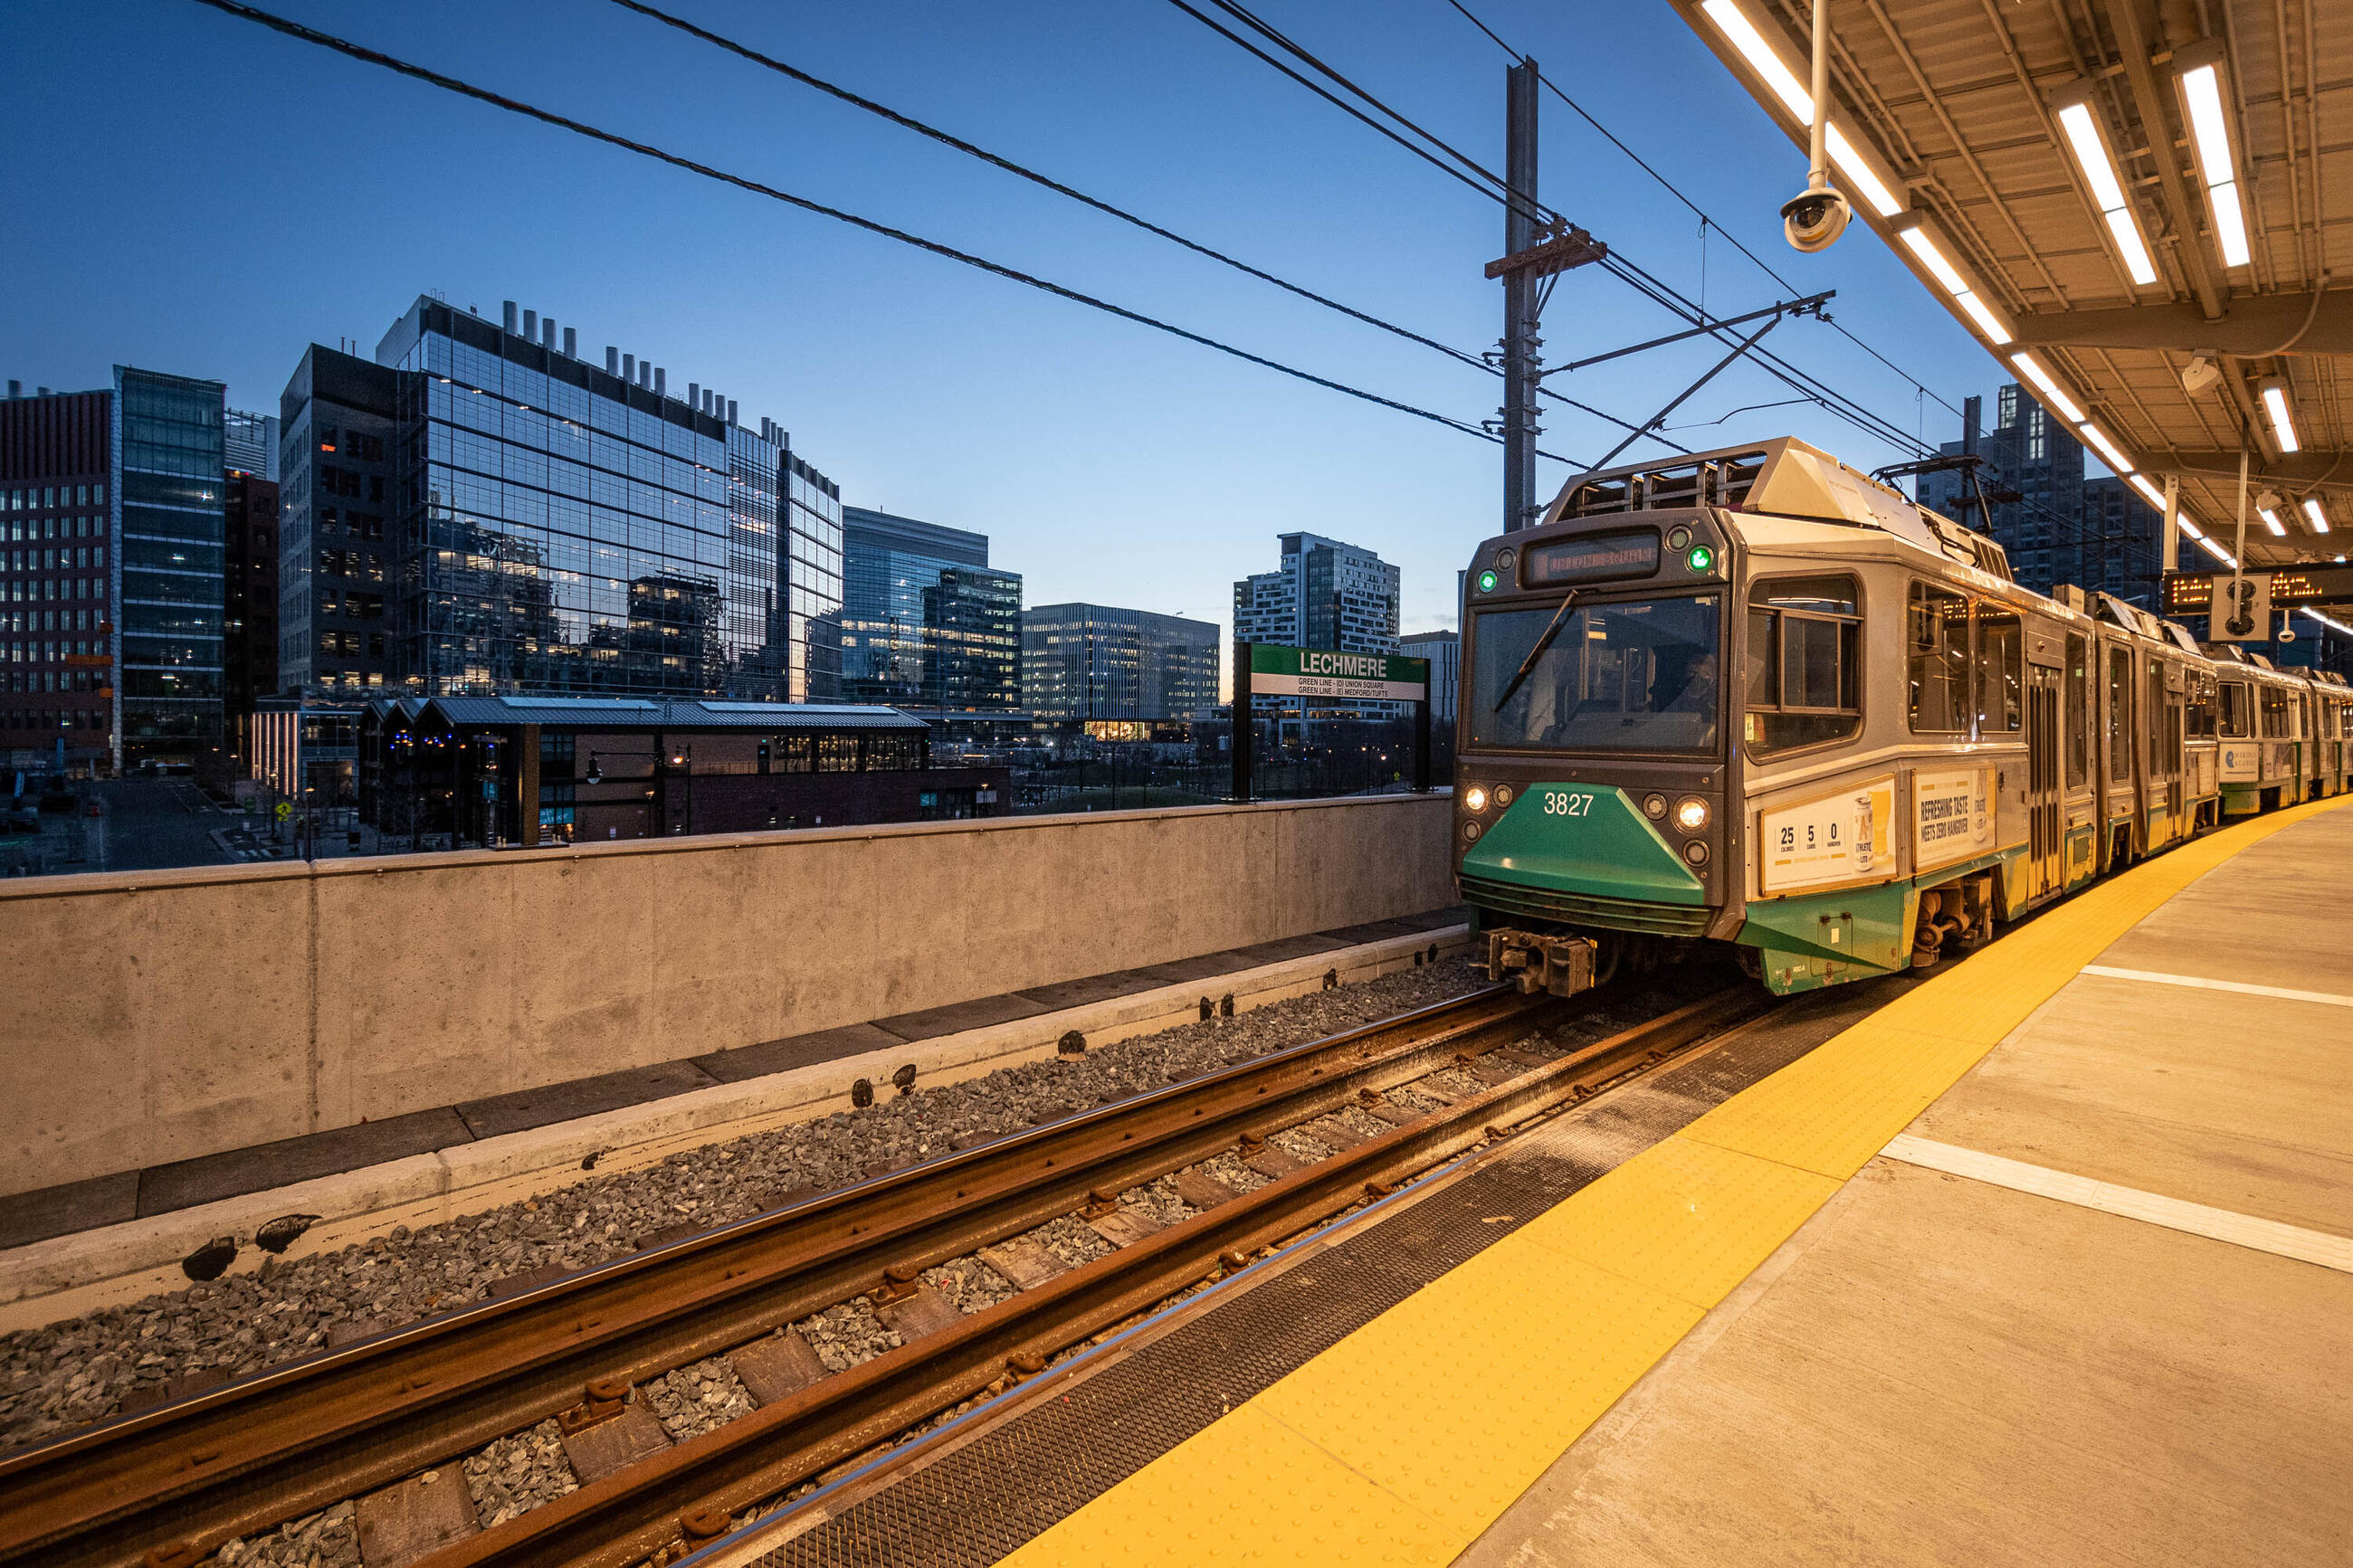 A Green Line train approaches Lechmere at dusk (March 2022)